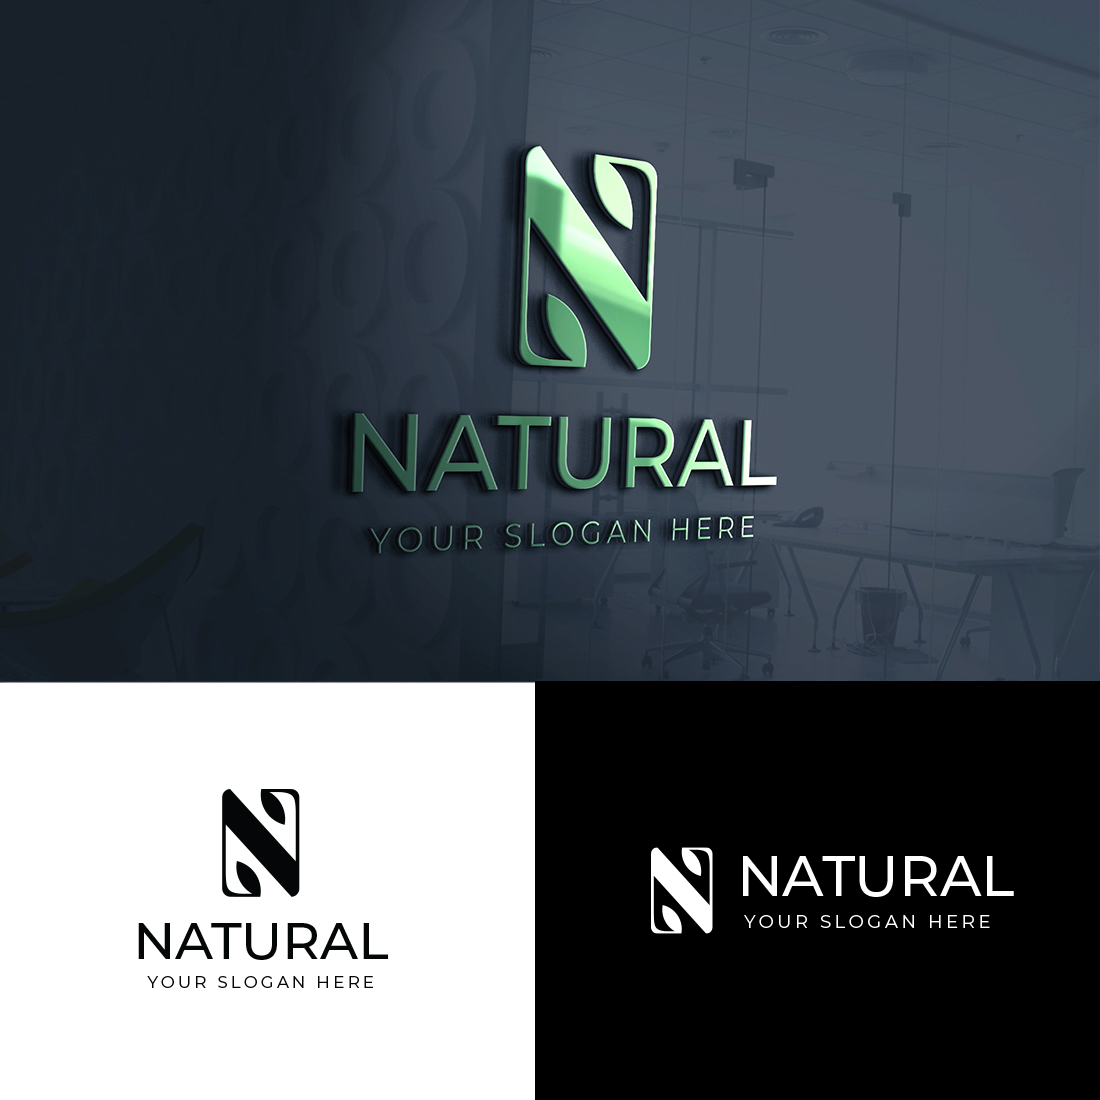 Letter N and Leaves Logo Template (Natural) cover image.